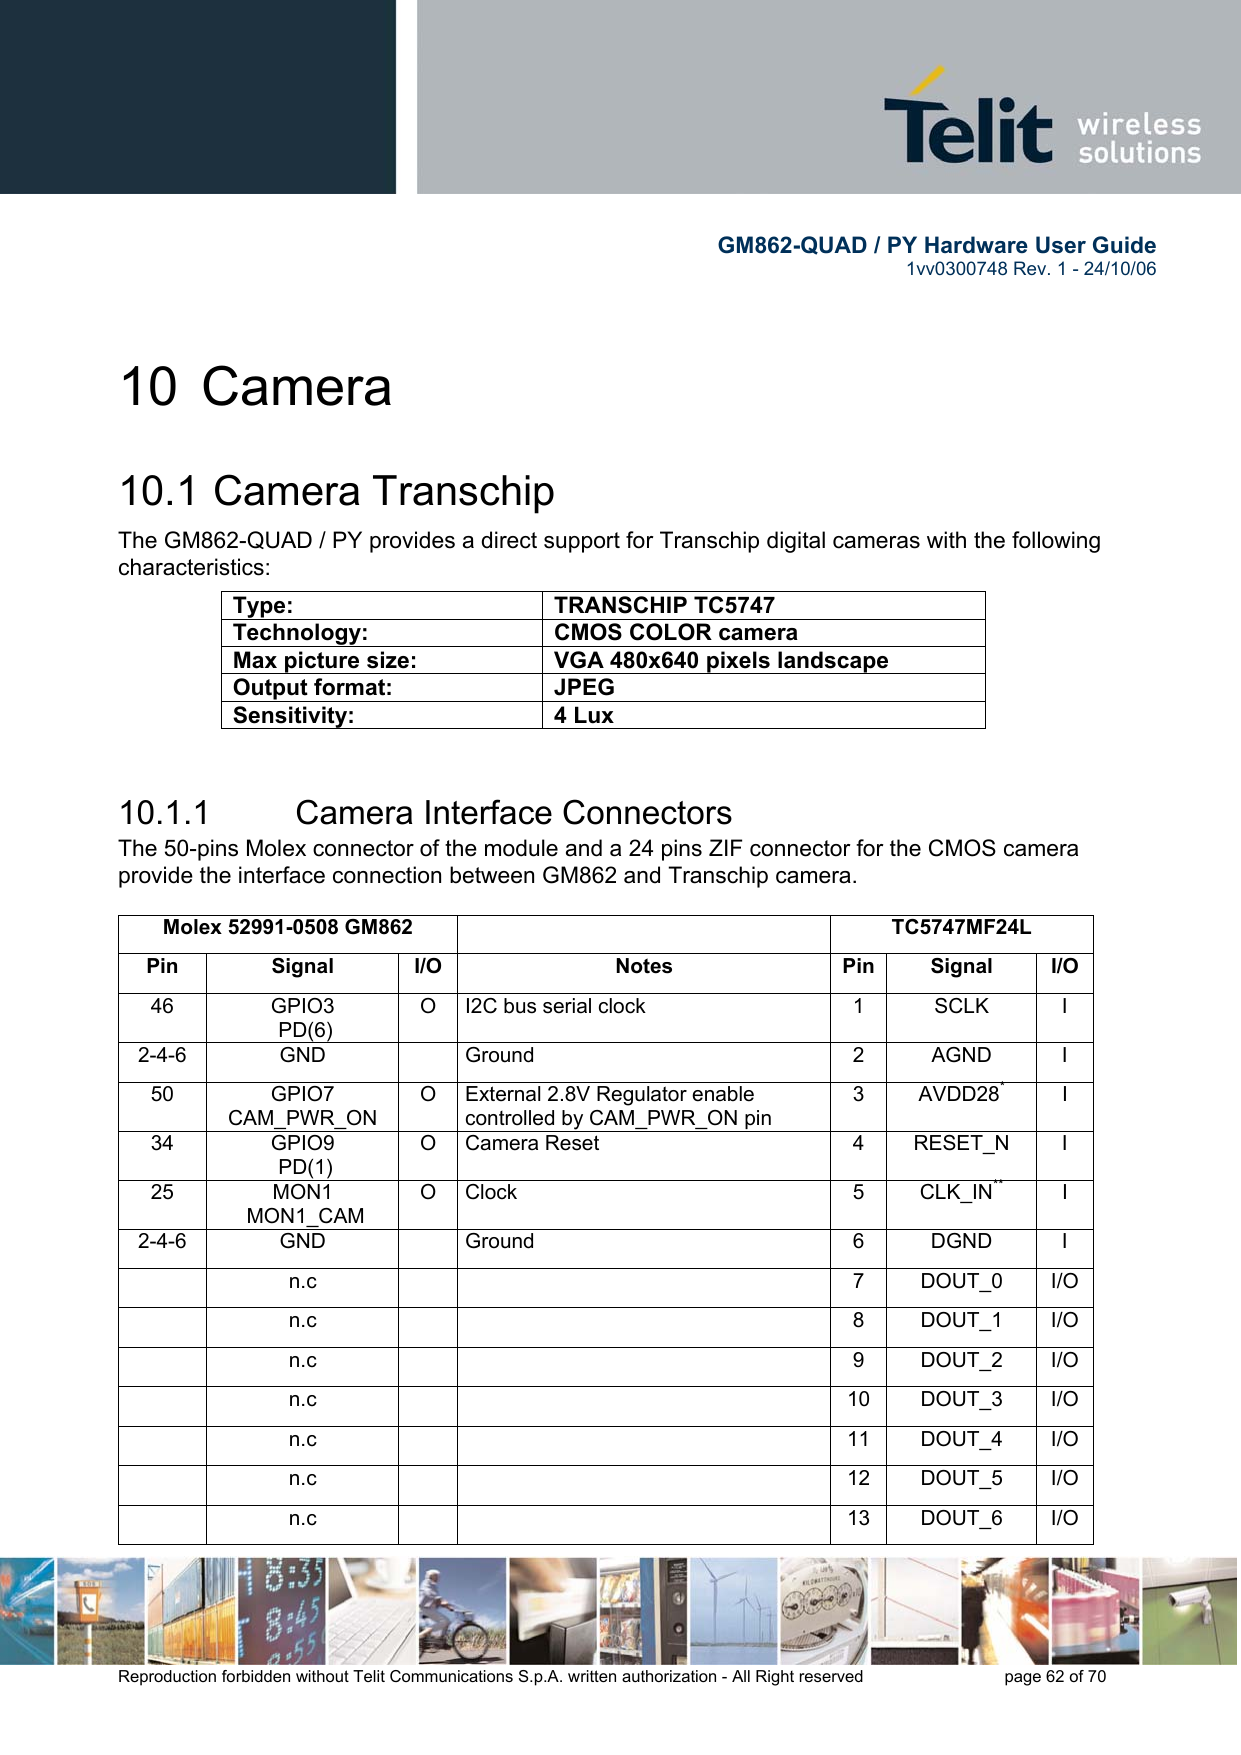        GM862-QUAD / PY Hardware User Guide   1vv0300748 Rev. 1 - 24/10/06    Reproduction forbidden without Telit Communications S.p.A. written authorization - All Right reserved    page 62 of 70  10 Camera 10.1  Camera Transchip The GM862-QUAD / PY provides a direct support for Transchip digital cameras with the following characteristics:  10.1.1  Camera Interface Connectors The 50-pins Molex connector of the module and a 24 pins ZIF connector for the CMOS camera provide the interface connection between GM862 and Transchip camera.  Molex 52991-0508 GM862   TC5747MF24L Pin Signal I/O  Notes  Pin Signal I/O 46 GPIO3  PD(6) O  I2C bus serial clock  1  SCLK  I 2-4-6 GND   Ground  2 AGND I 50 GPIO7 CAM_PWR_ON O  External 2.8V Regulator enable controlled by CAM_PWR_ON pin 3 AVDD28* I 34 GPIO9  PD(1) O Camera Reset  4  RESET_N  I 25 MON1  MON1_CAM O Clock  5  CLK_IN** I 2-4-6 GND   Ground  6 DGND I  n.c    7 DOUT_0 I/O  n.c    8 DOUT_1  I/O  n.c    9 DOUT_2 I/O  n.c    10 DOUT_3 I/O  n.c    11 DOUT_4 I/O  n.c    12 DOUT_5 I/O  n.c    13 DOUT_6 I/O Type: TRANSCHIP TC5747 Technology:  CMOS COLOR camera Max picture size:  VGA 480x640 pixels landscape Output format:  JPEG Sensitivity: 4 Lux 